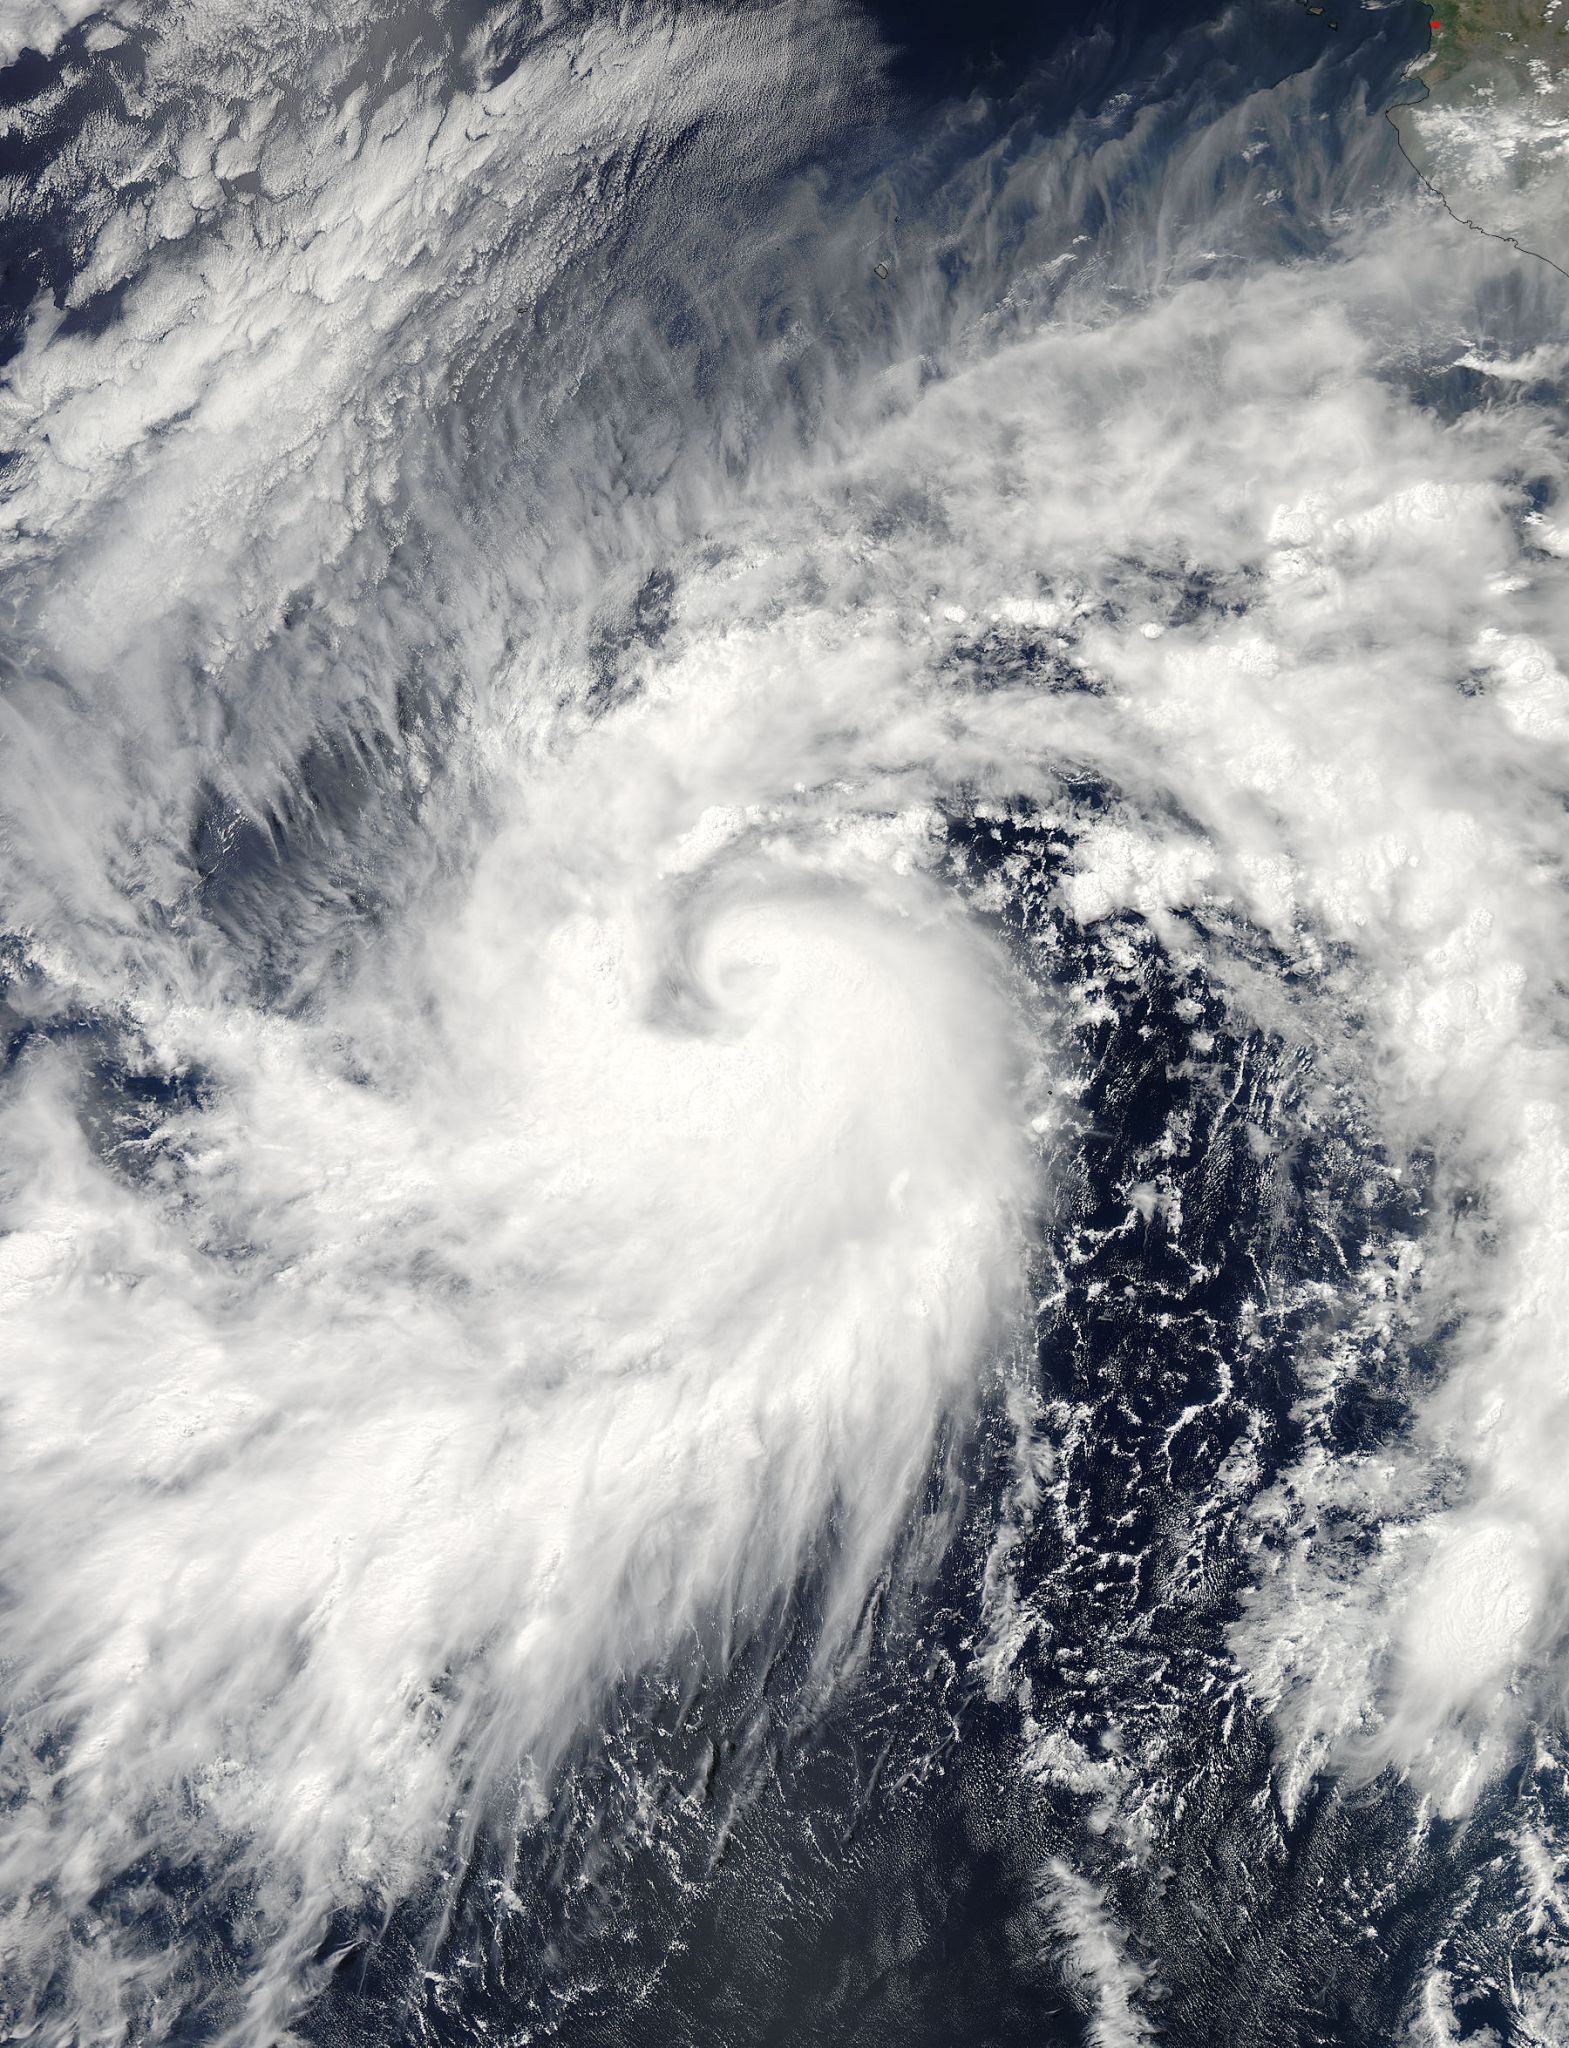 MODIS image of Andres